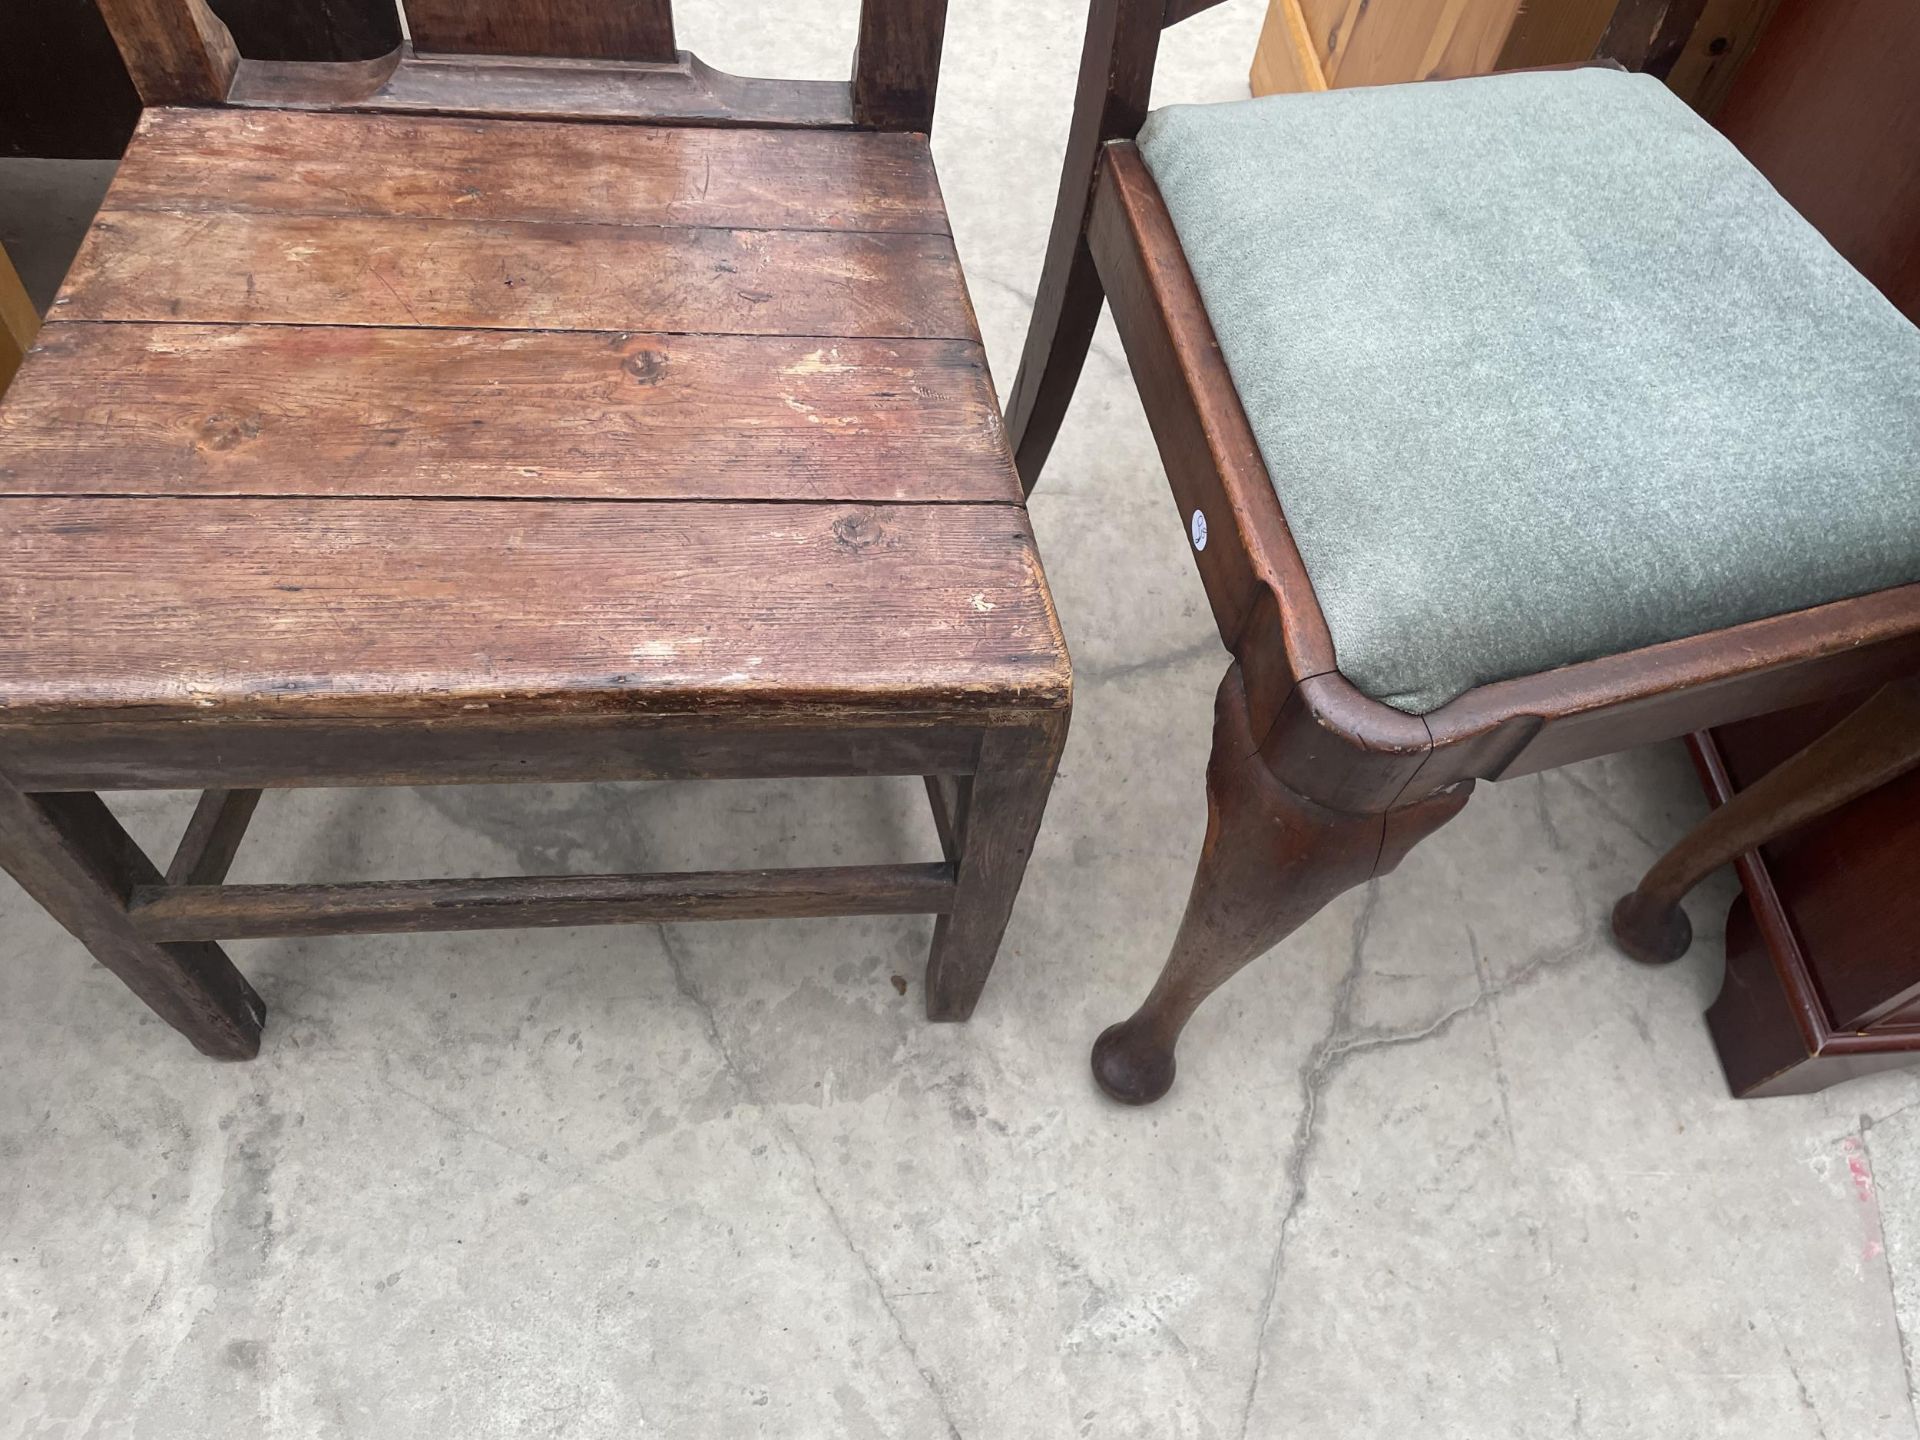 A 19TH CENTURY ELM AND BEECH SPLAT BACK CHAIR AND QUEEN ANNE STYLE CHAIR - Image 3 of 3